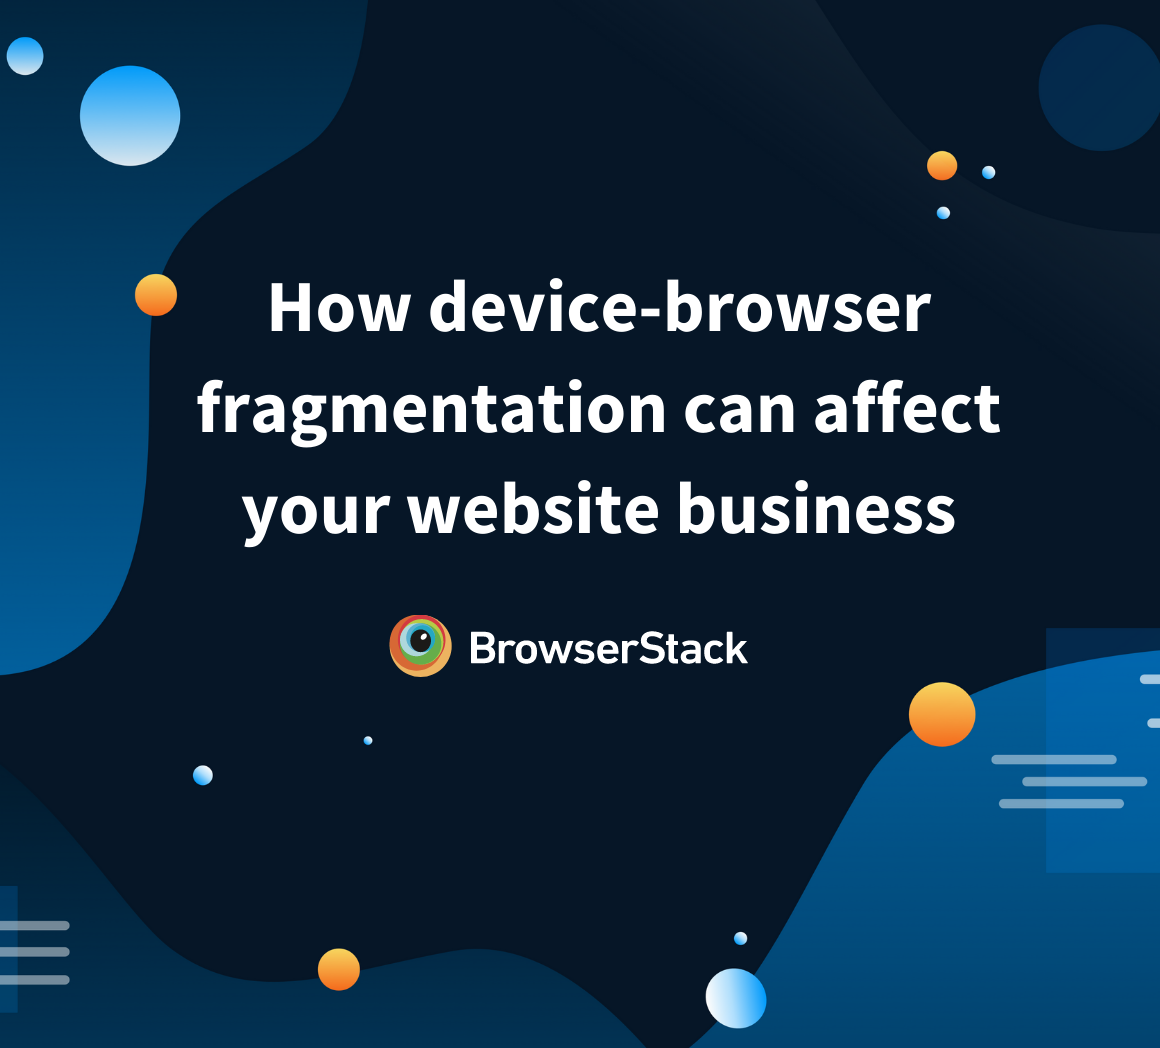 How device-browser fragmentation can affect your website business